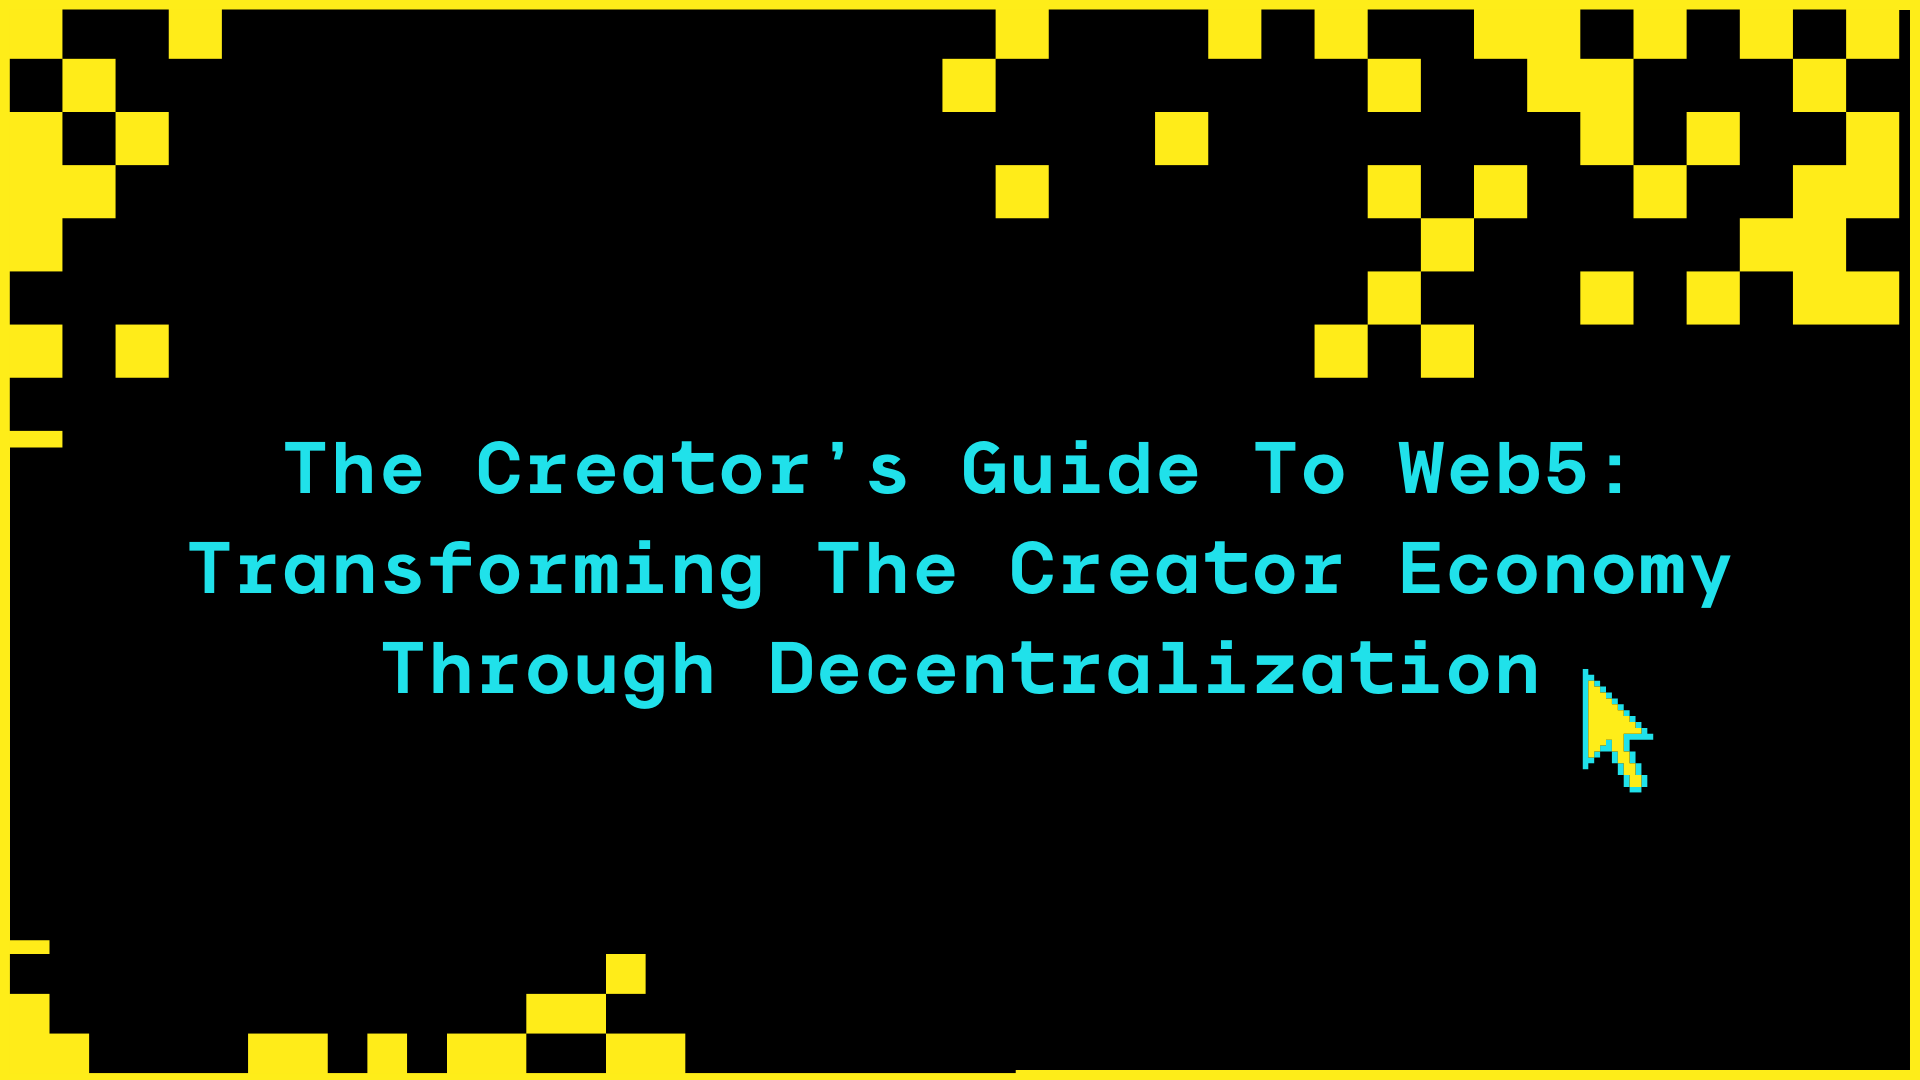 Transforming The Creator Economy Through Decentralization with Web5